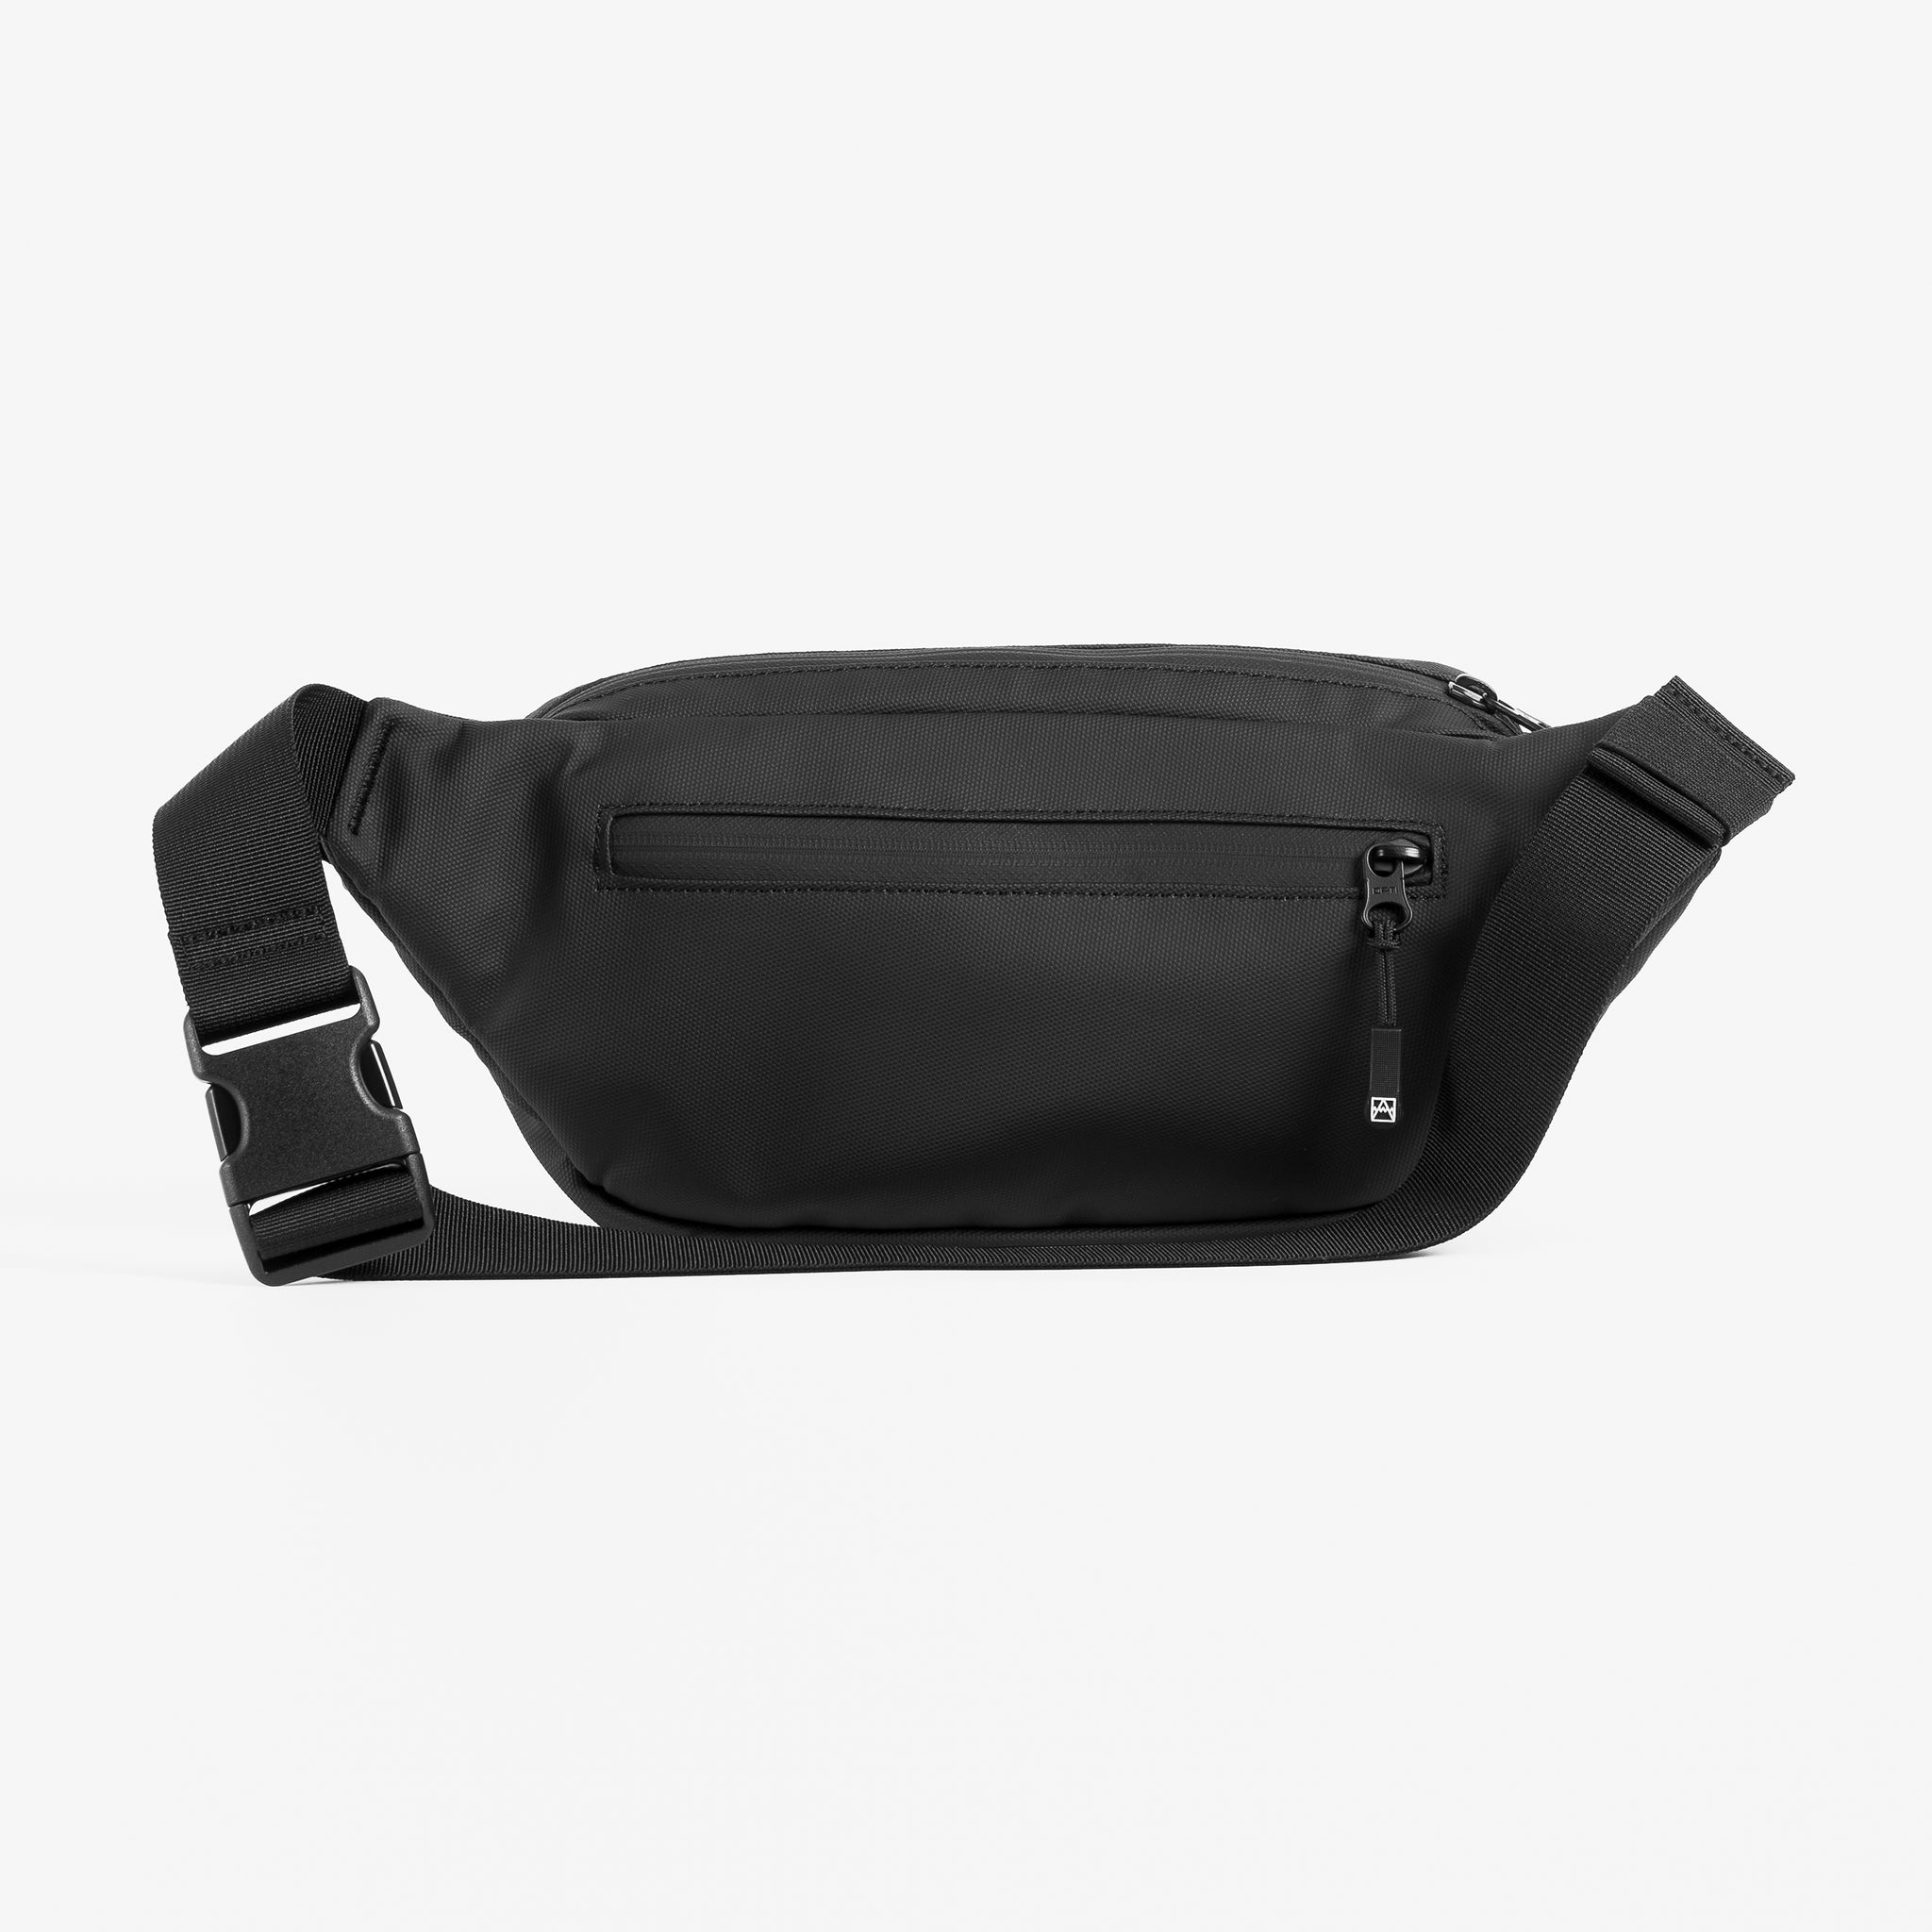 Back view of an All Black Crossbody bag with zip